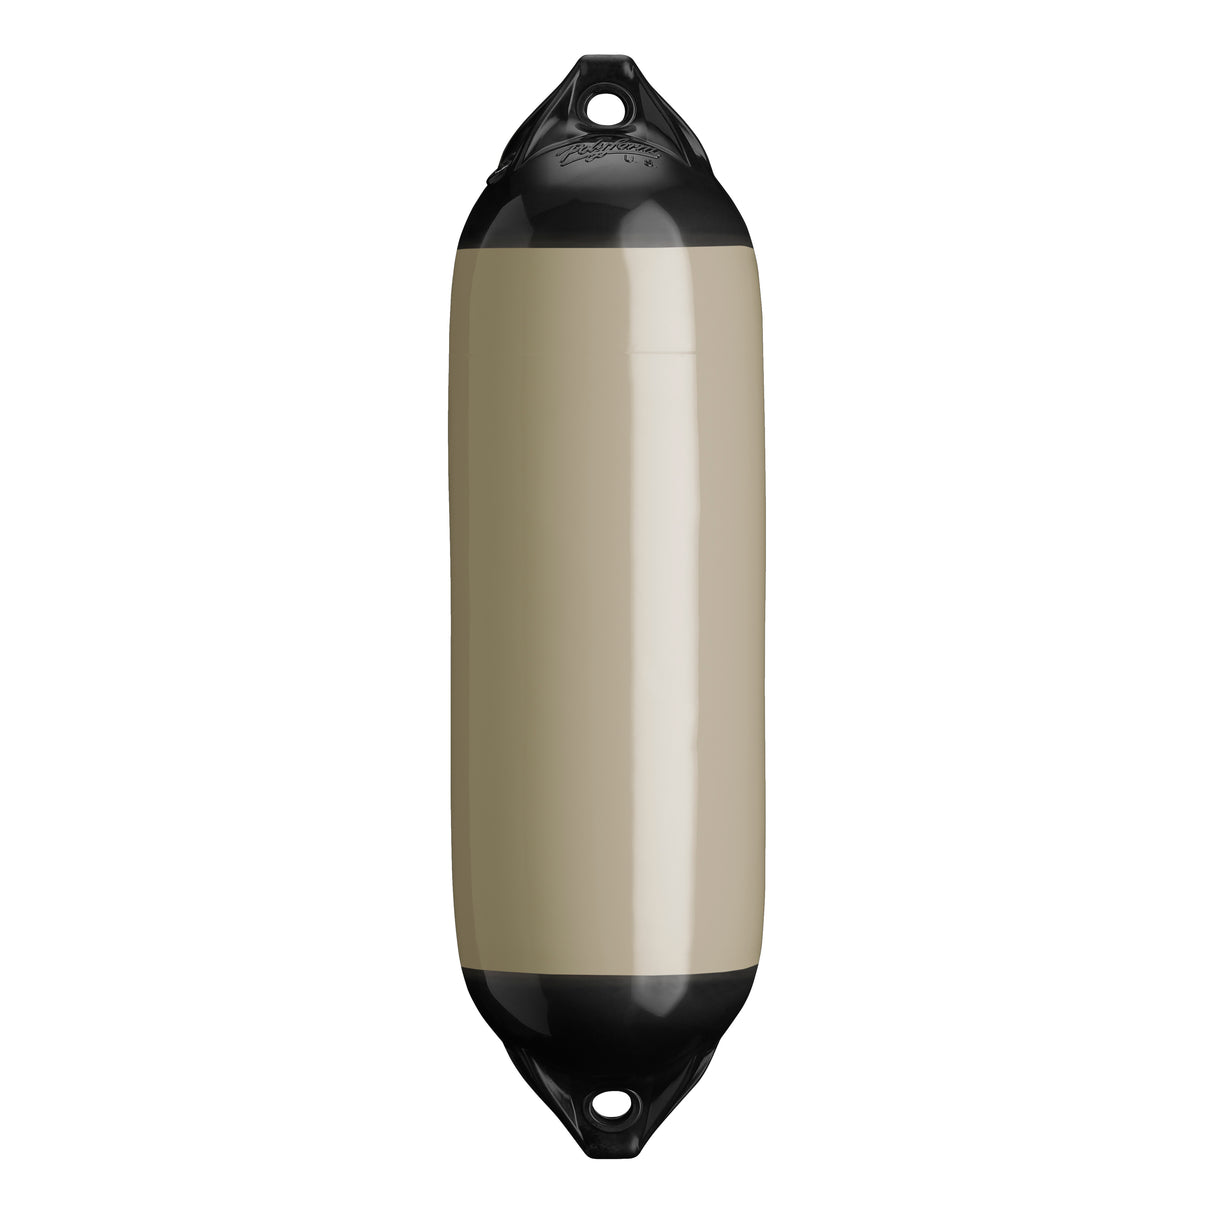 Sand boat fender with Black-Top, Polyform F-02 